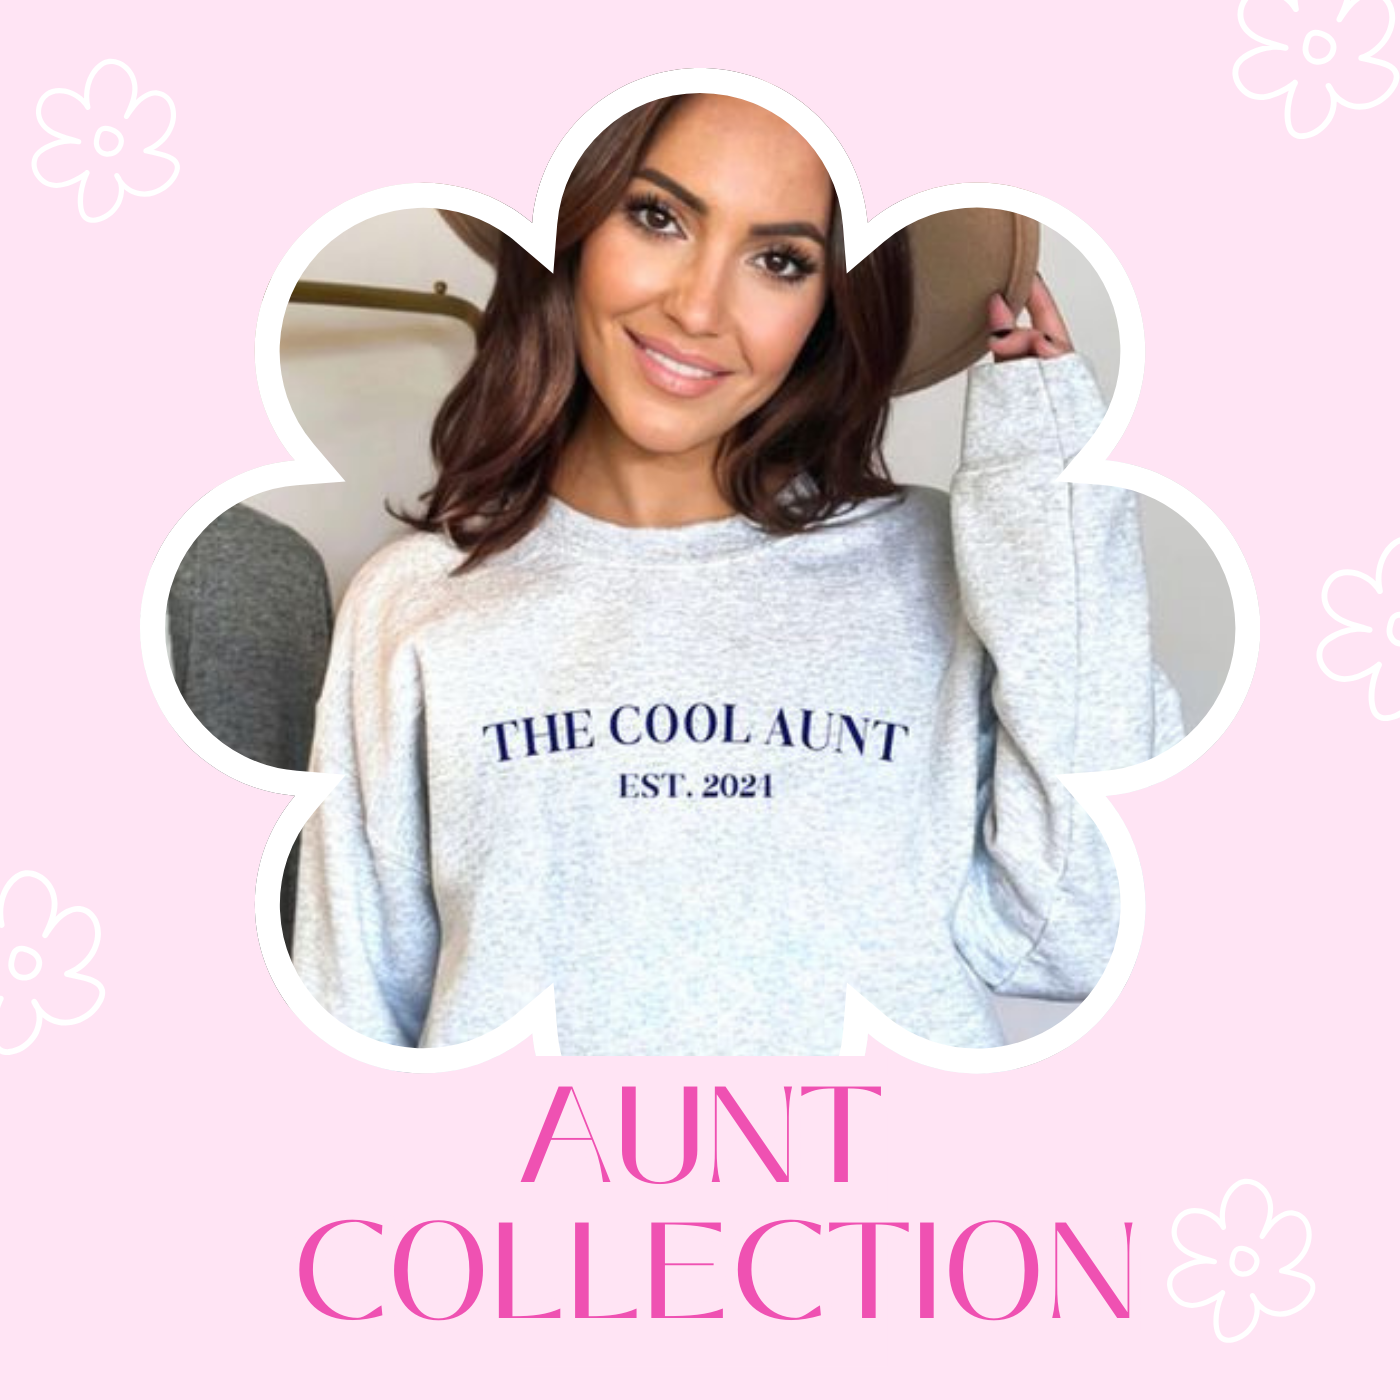 AUNT COLLECTION